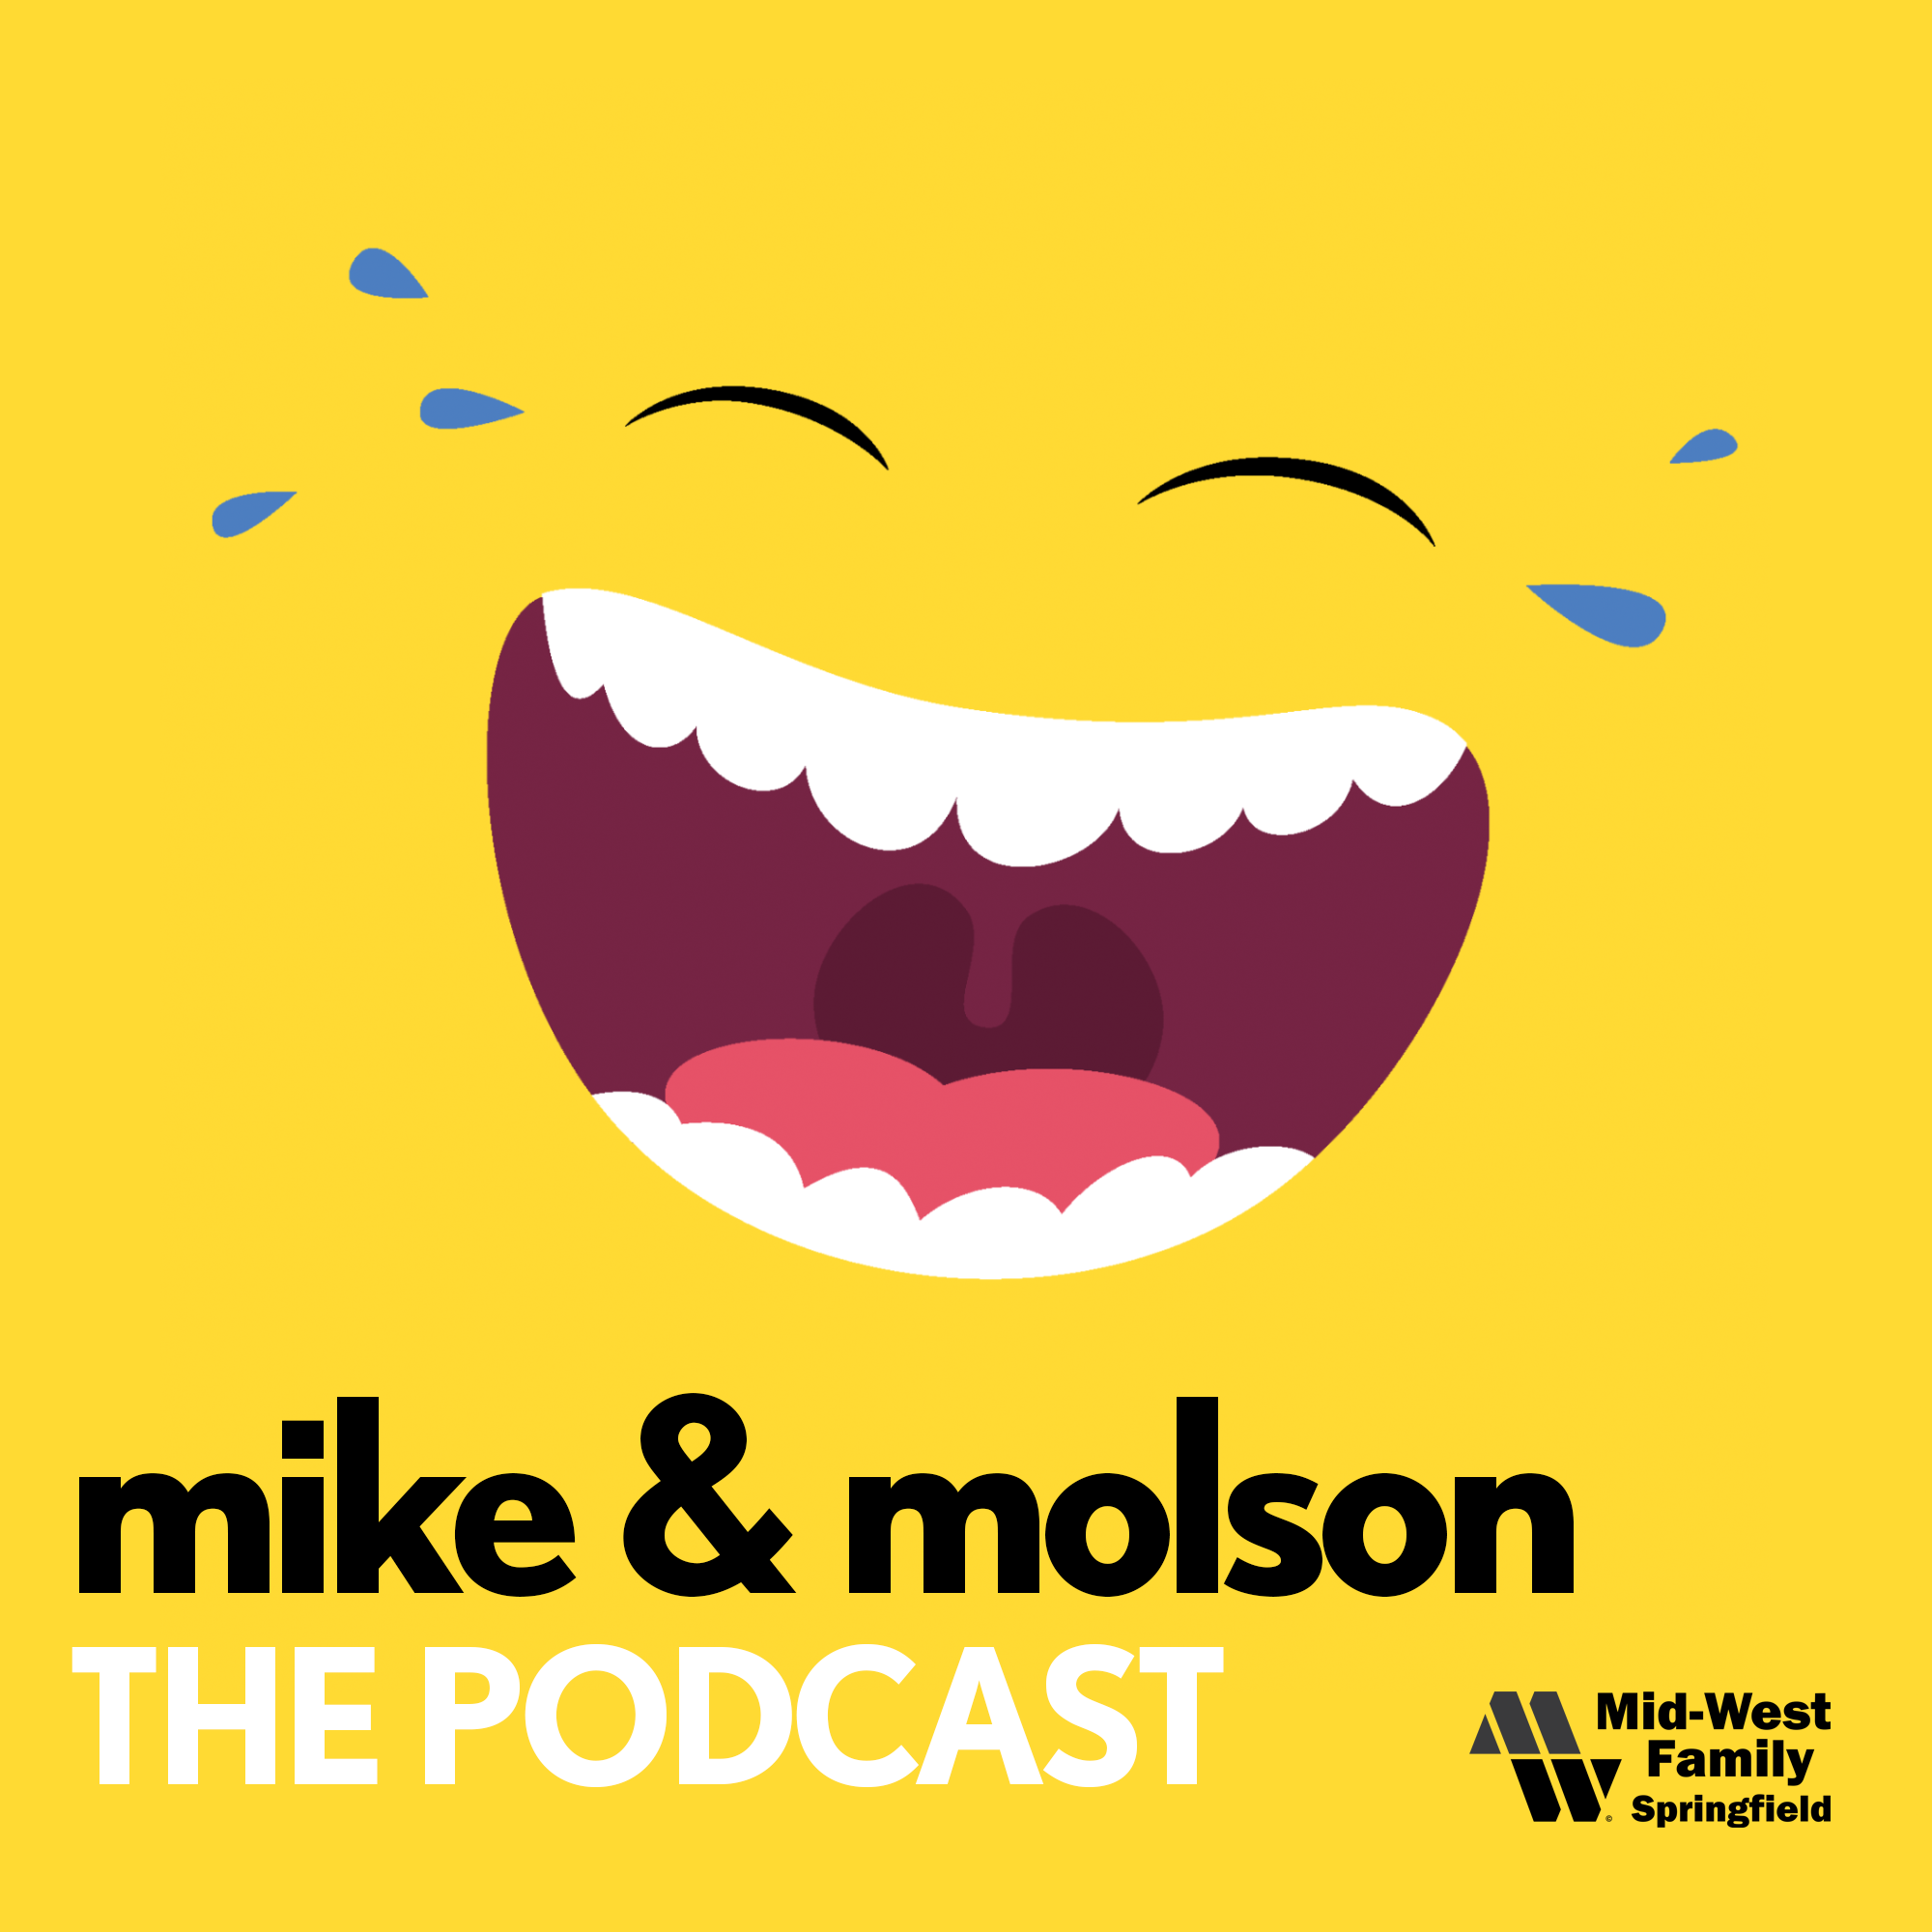 Mike & Molson Too Good For Radio Podcast Year 2 Episode 15 Fat Plane and Debate Fart